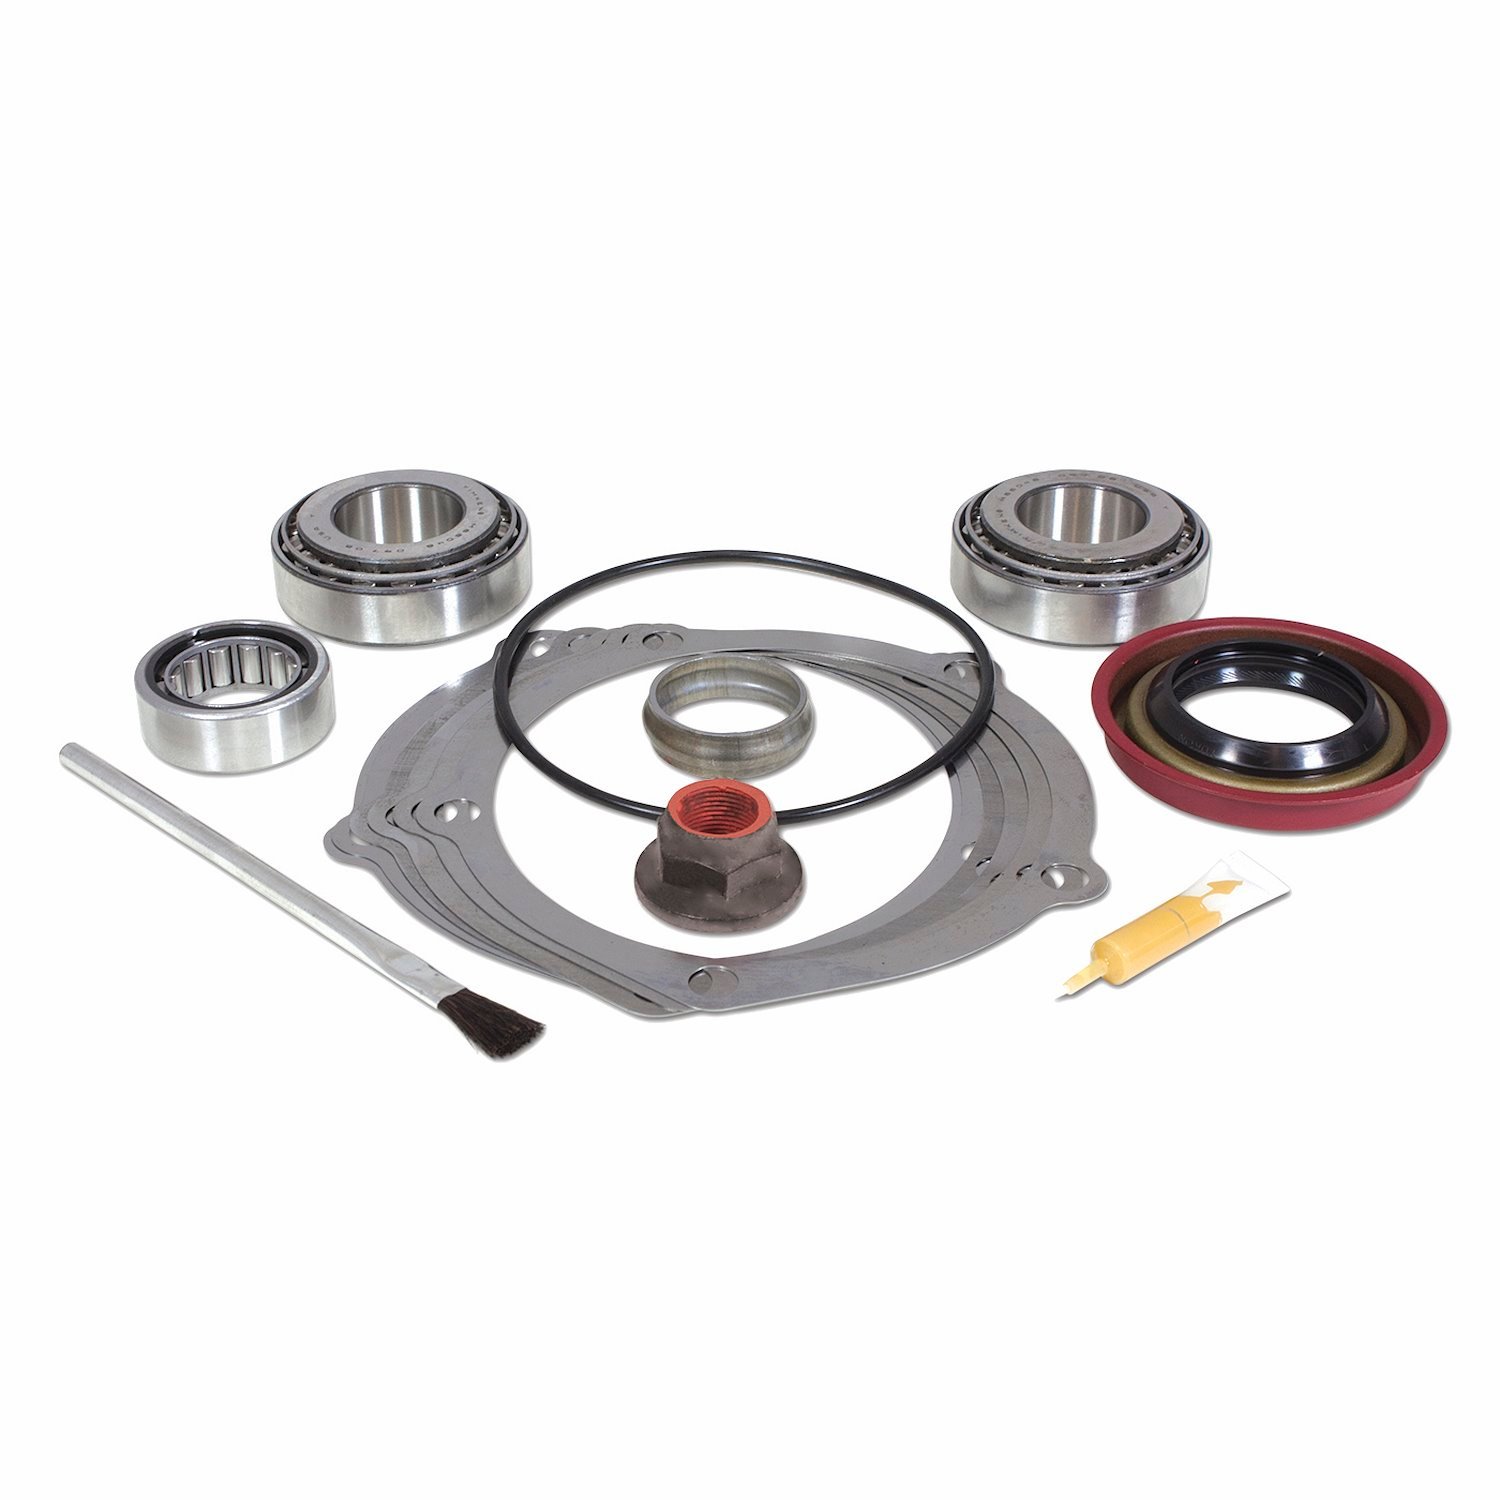 Pinion Install Kit For Ford 9 in. Differential, 35 Spline, Oversize